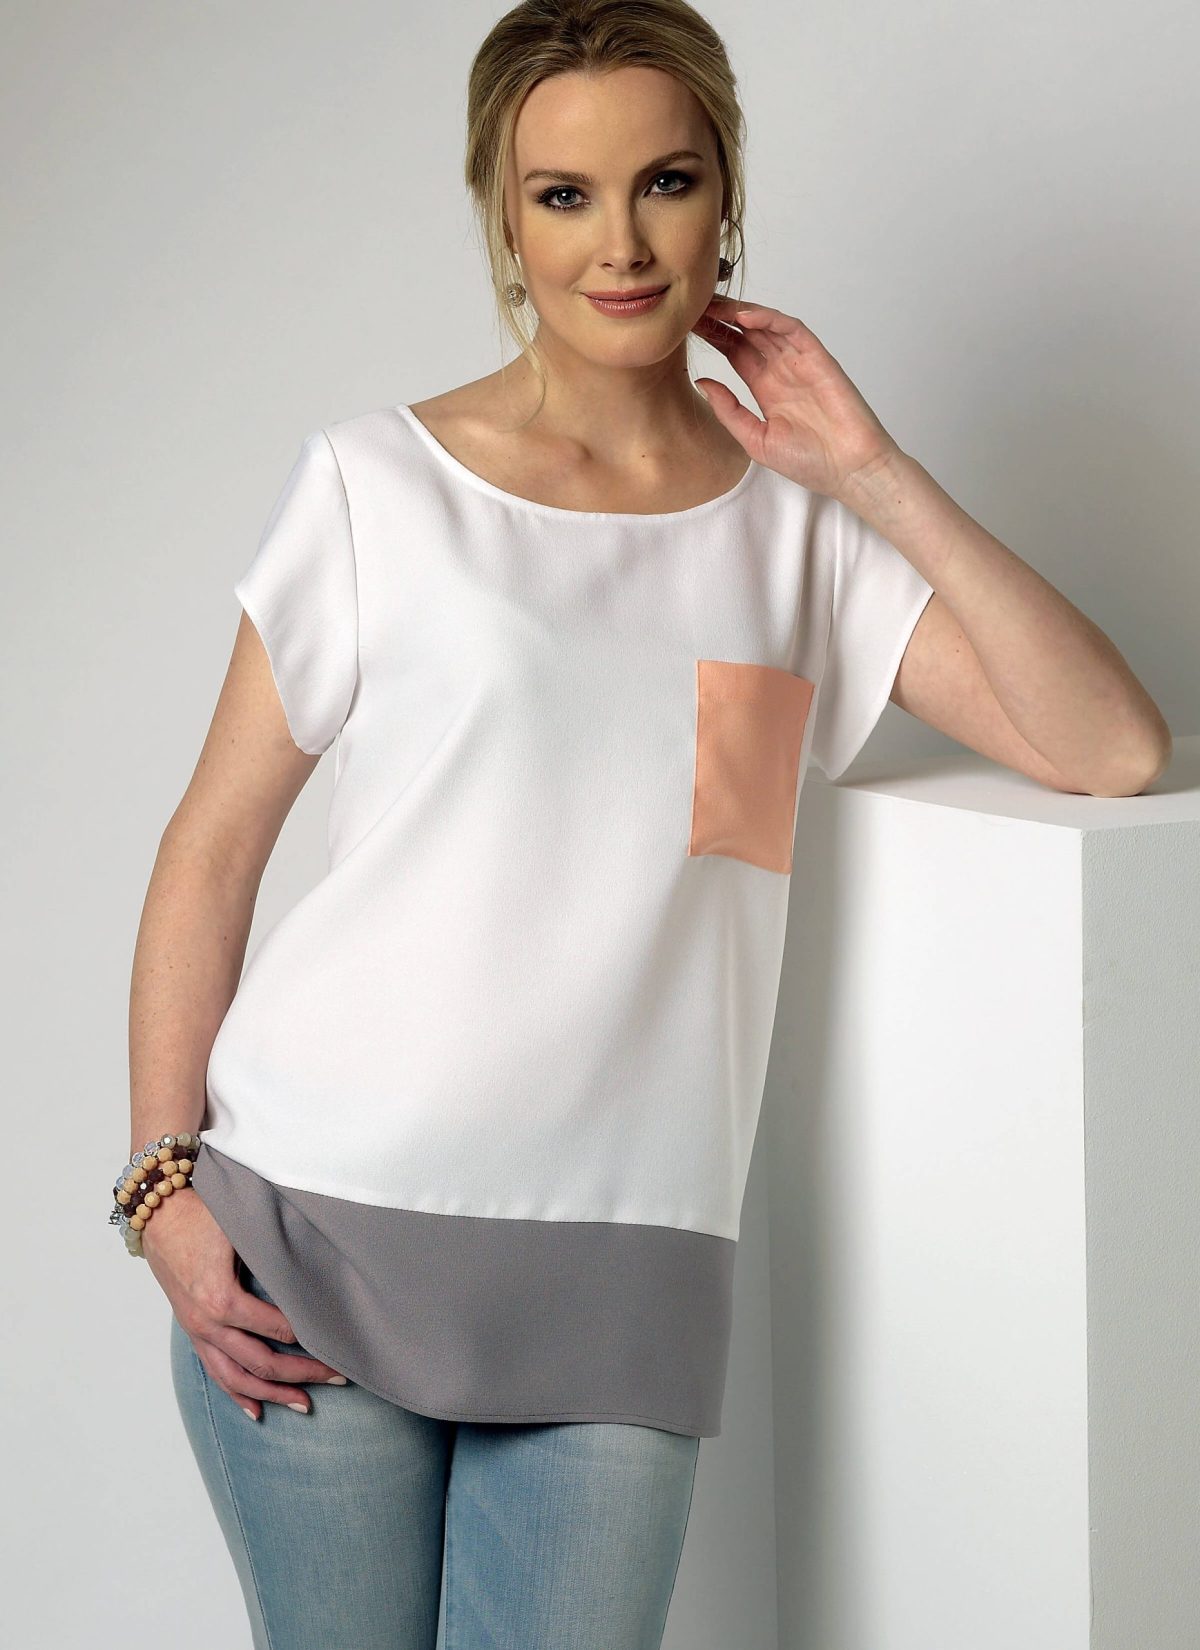 Butterick Sewing Pattern B6214 Misses' Top